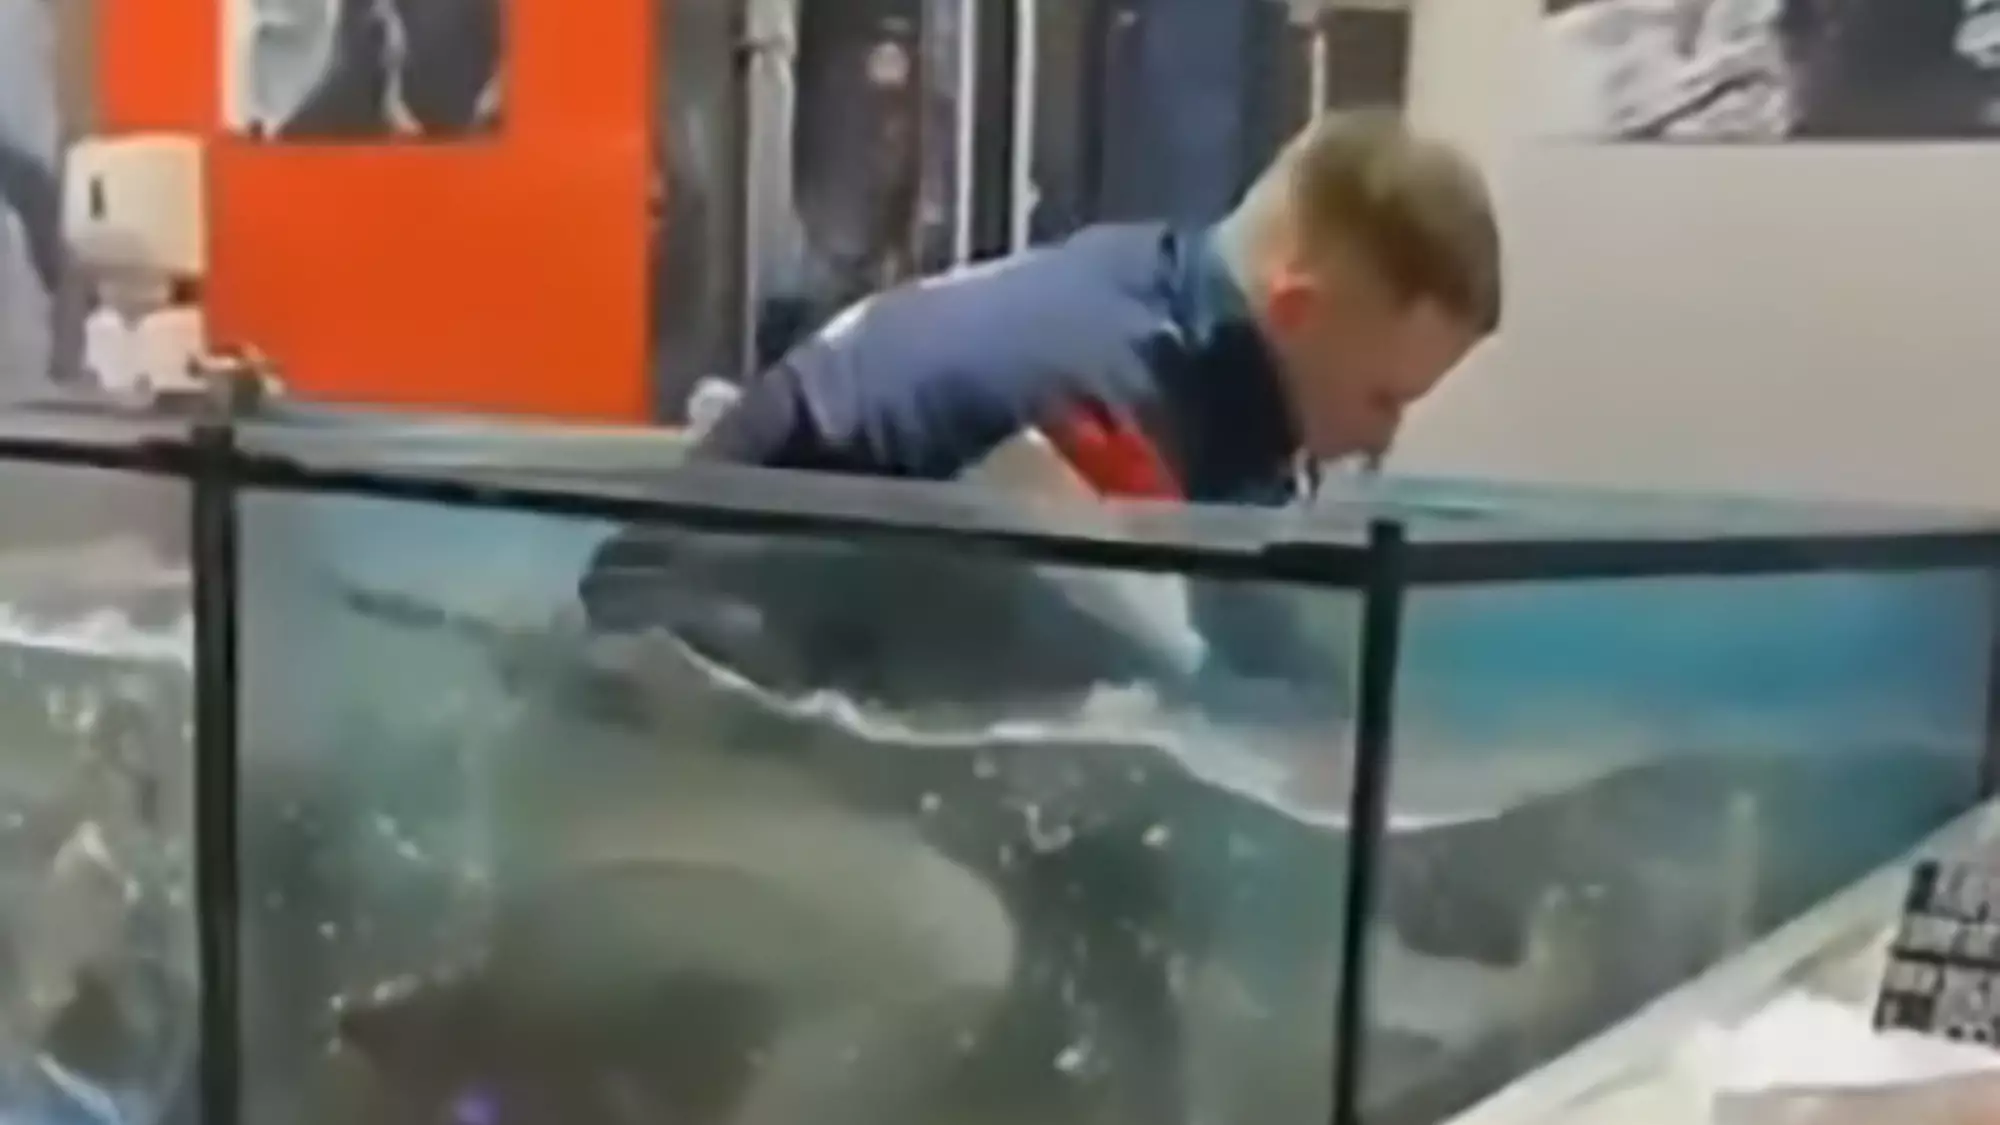 Man Retrieves Ring From Aquarium After Girlfriend Says No